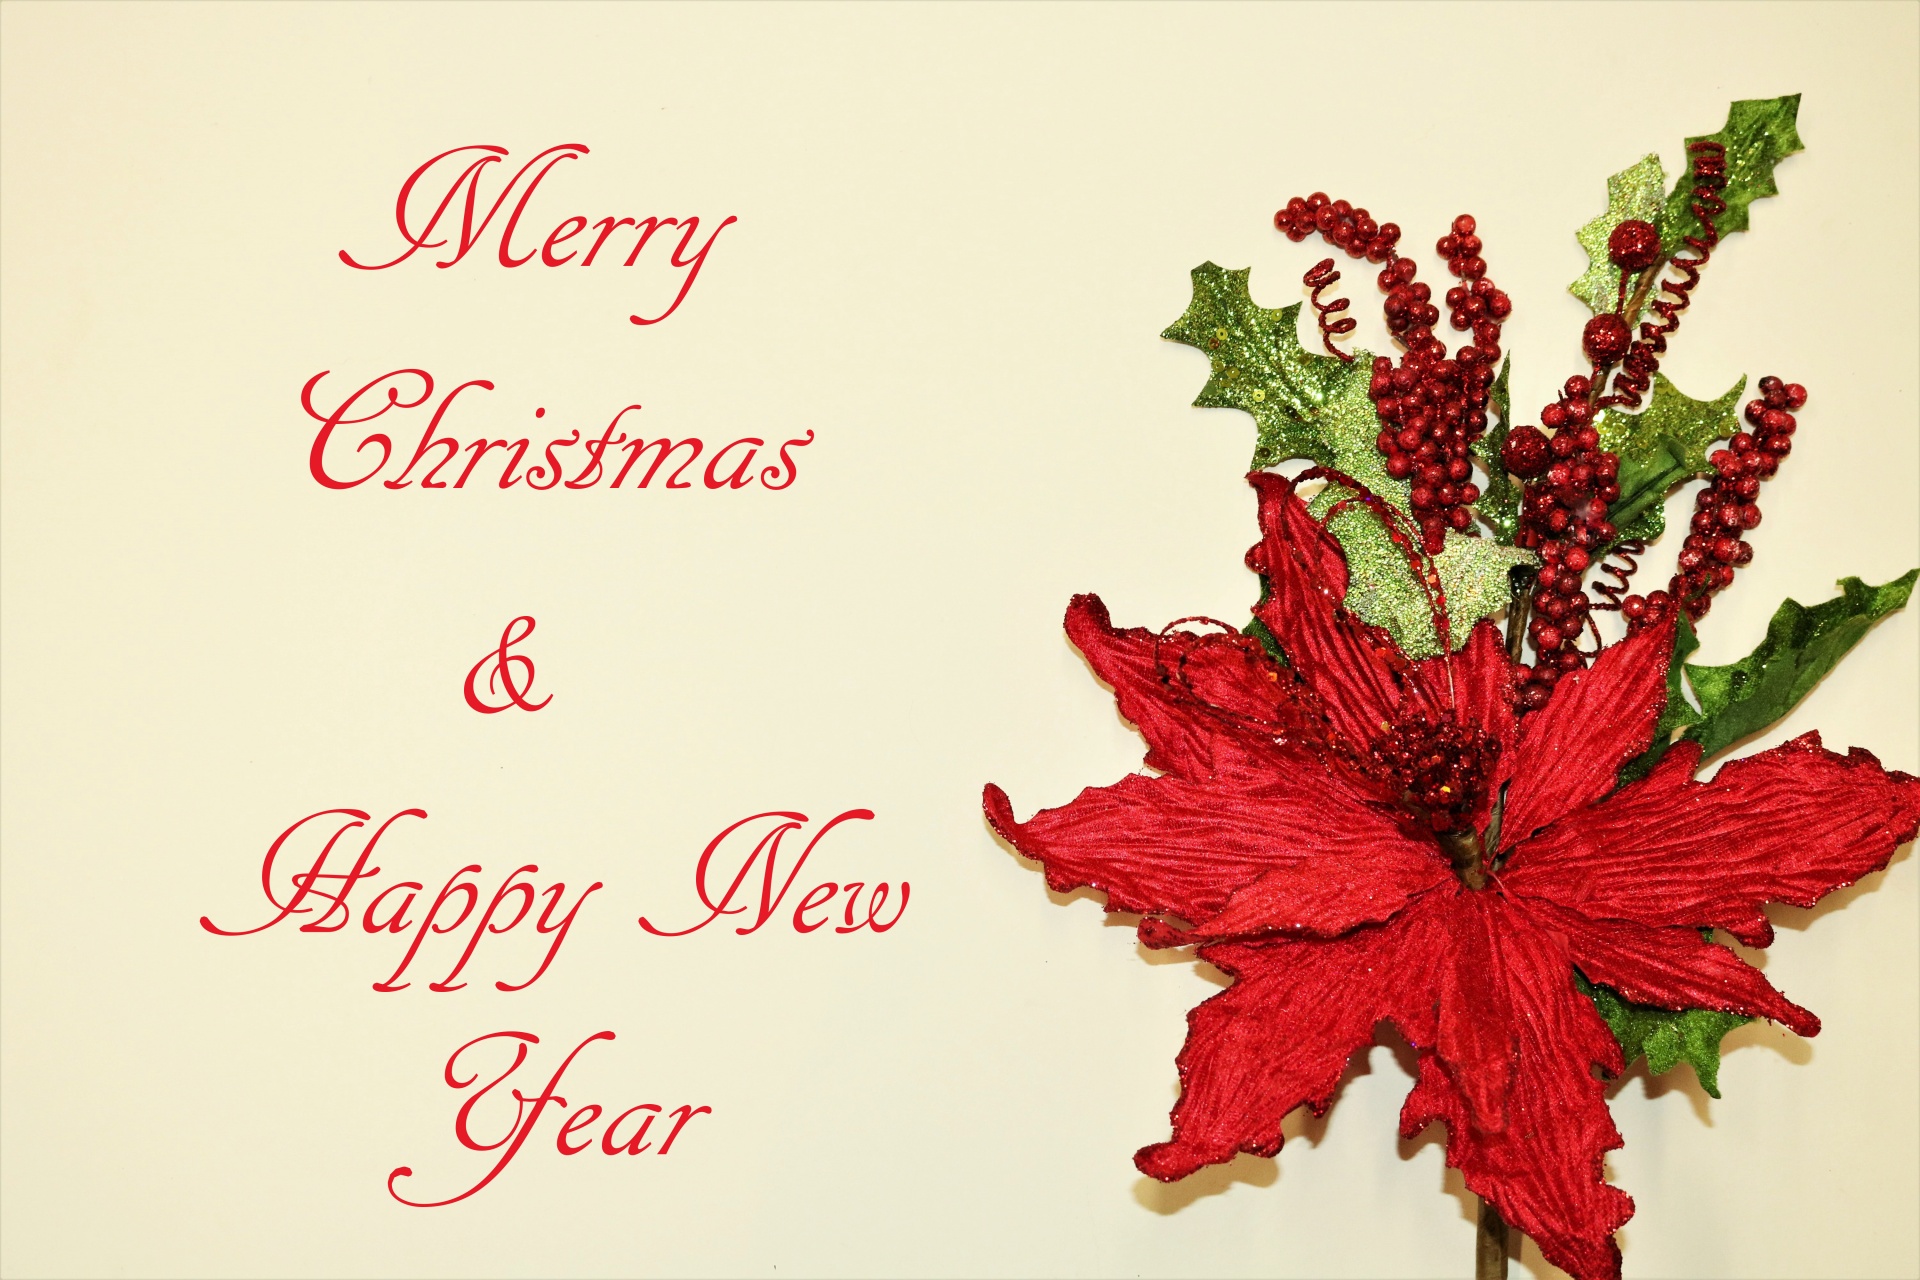 Close-up of a red poinsettia flower with green holly leaves and red berries, on a white background, with the text Merry Christmas and Happy New Year.